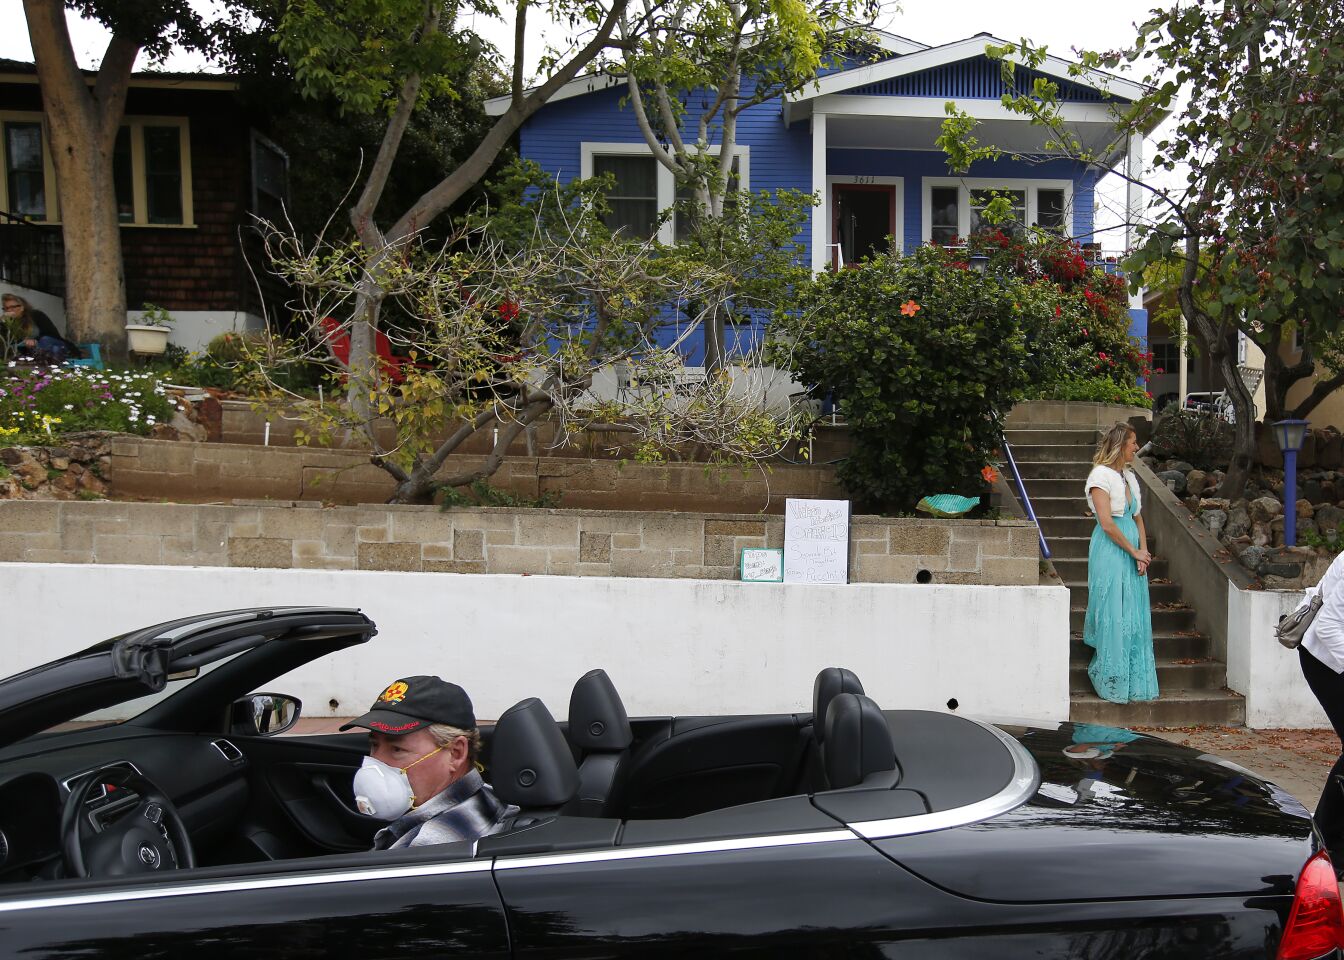 Ken Moser, of Mira Mesa, got a front row parking spot to watch opera singer Victoria Robertson perform from the porch of her North Park home on April 19, 2020. For the second week in a row, Robertson performed for 15 minutes to a crowd, who kept their distance from each other on the street below.